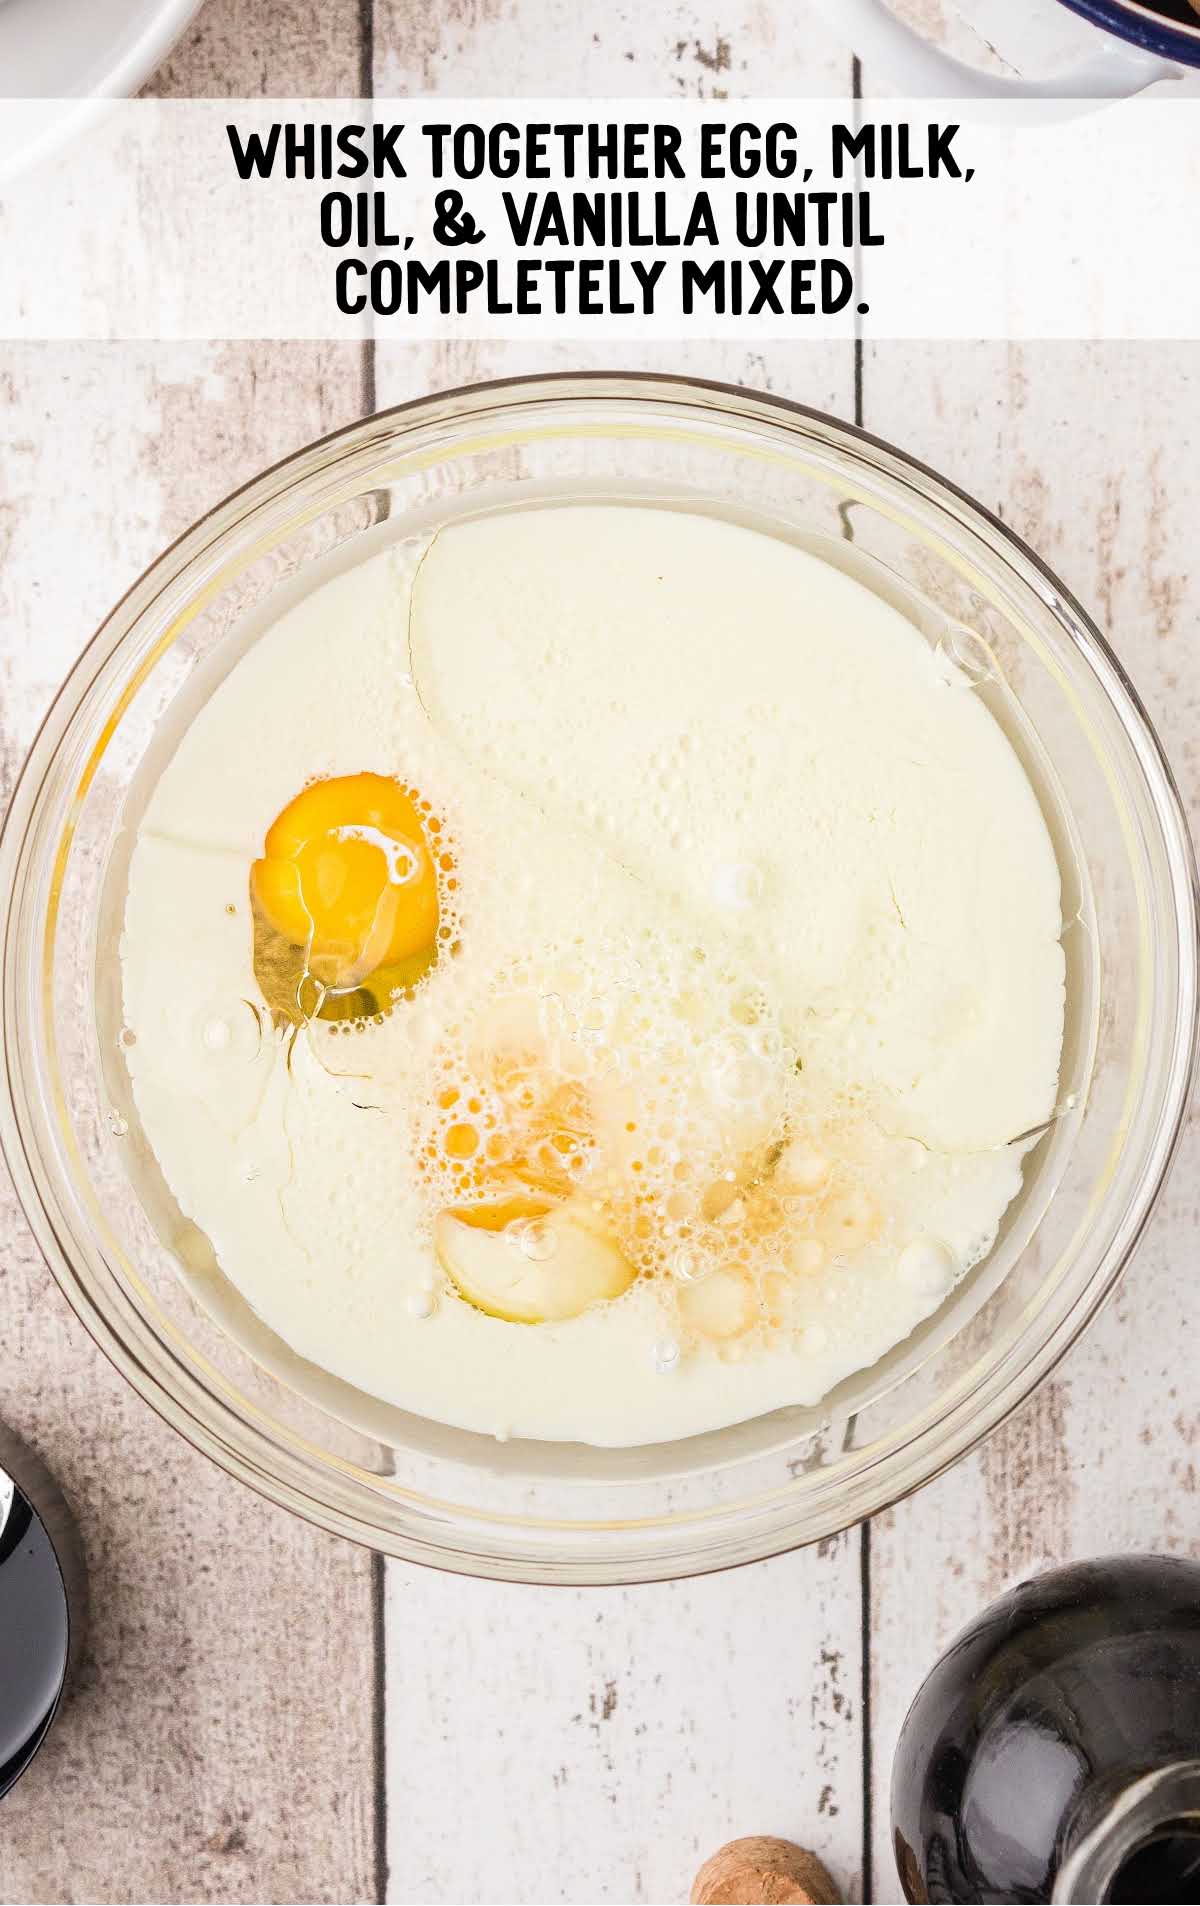 egg, milk, oil, and vanilla whisked together 